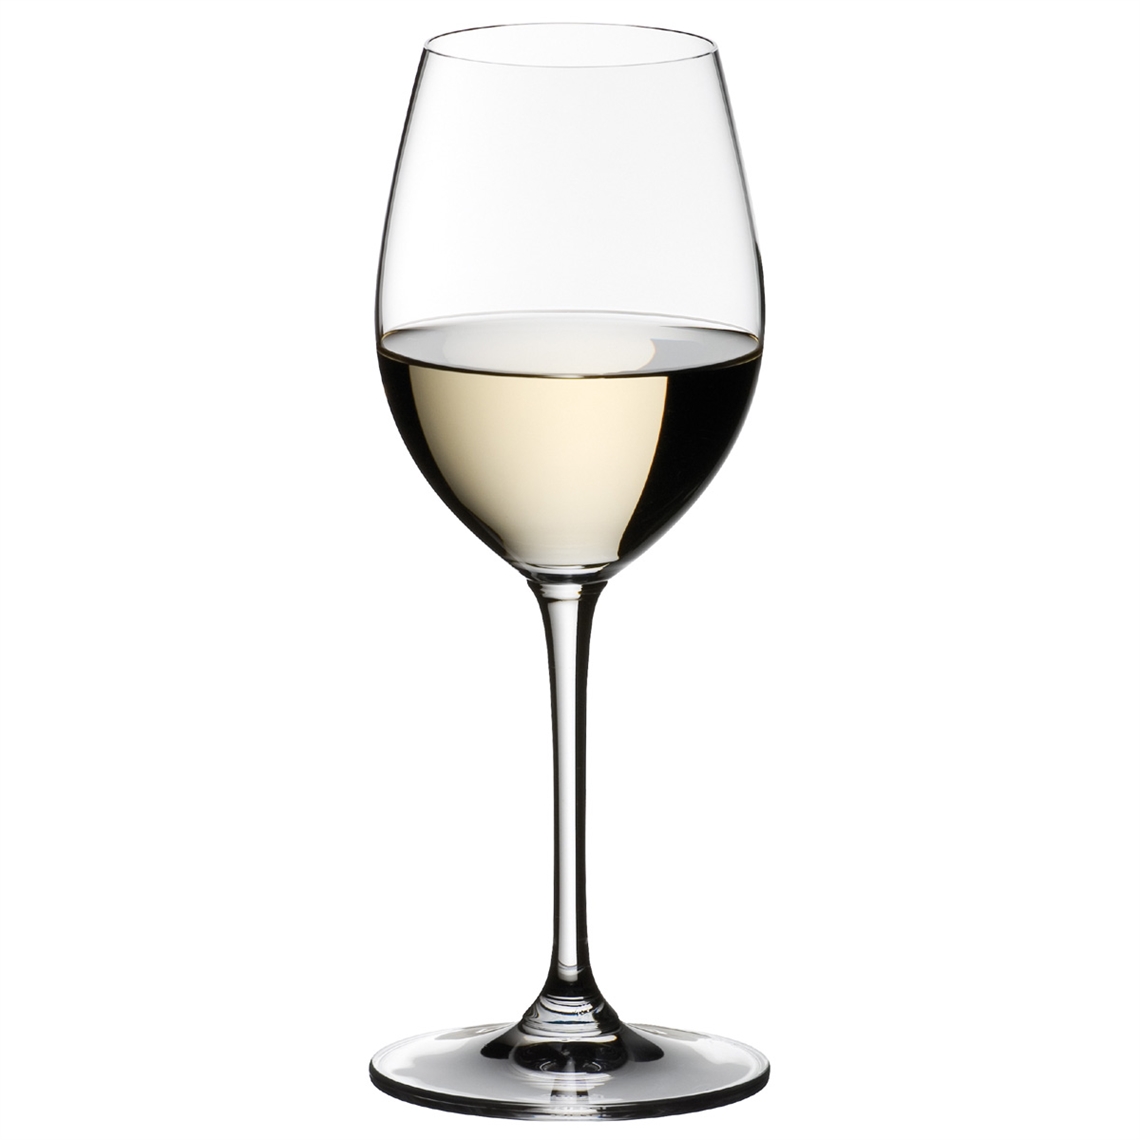 View more sydonios from our Dessert Wine Glasses range